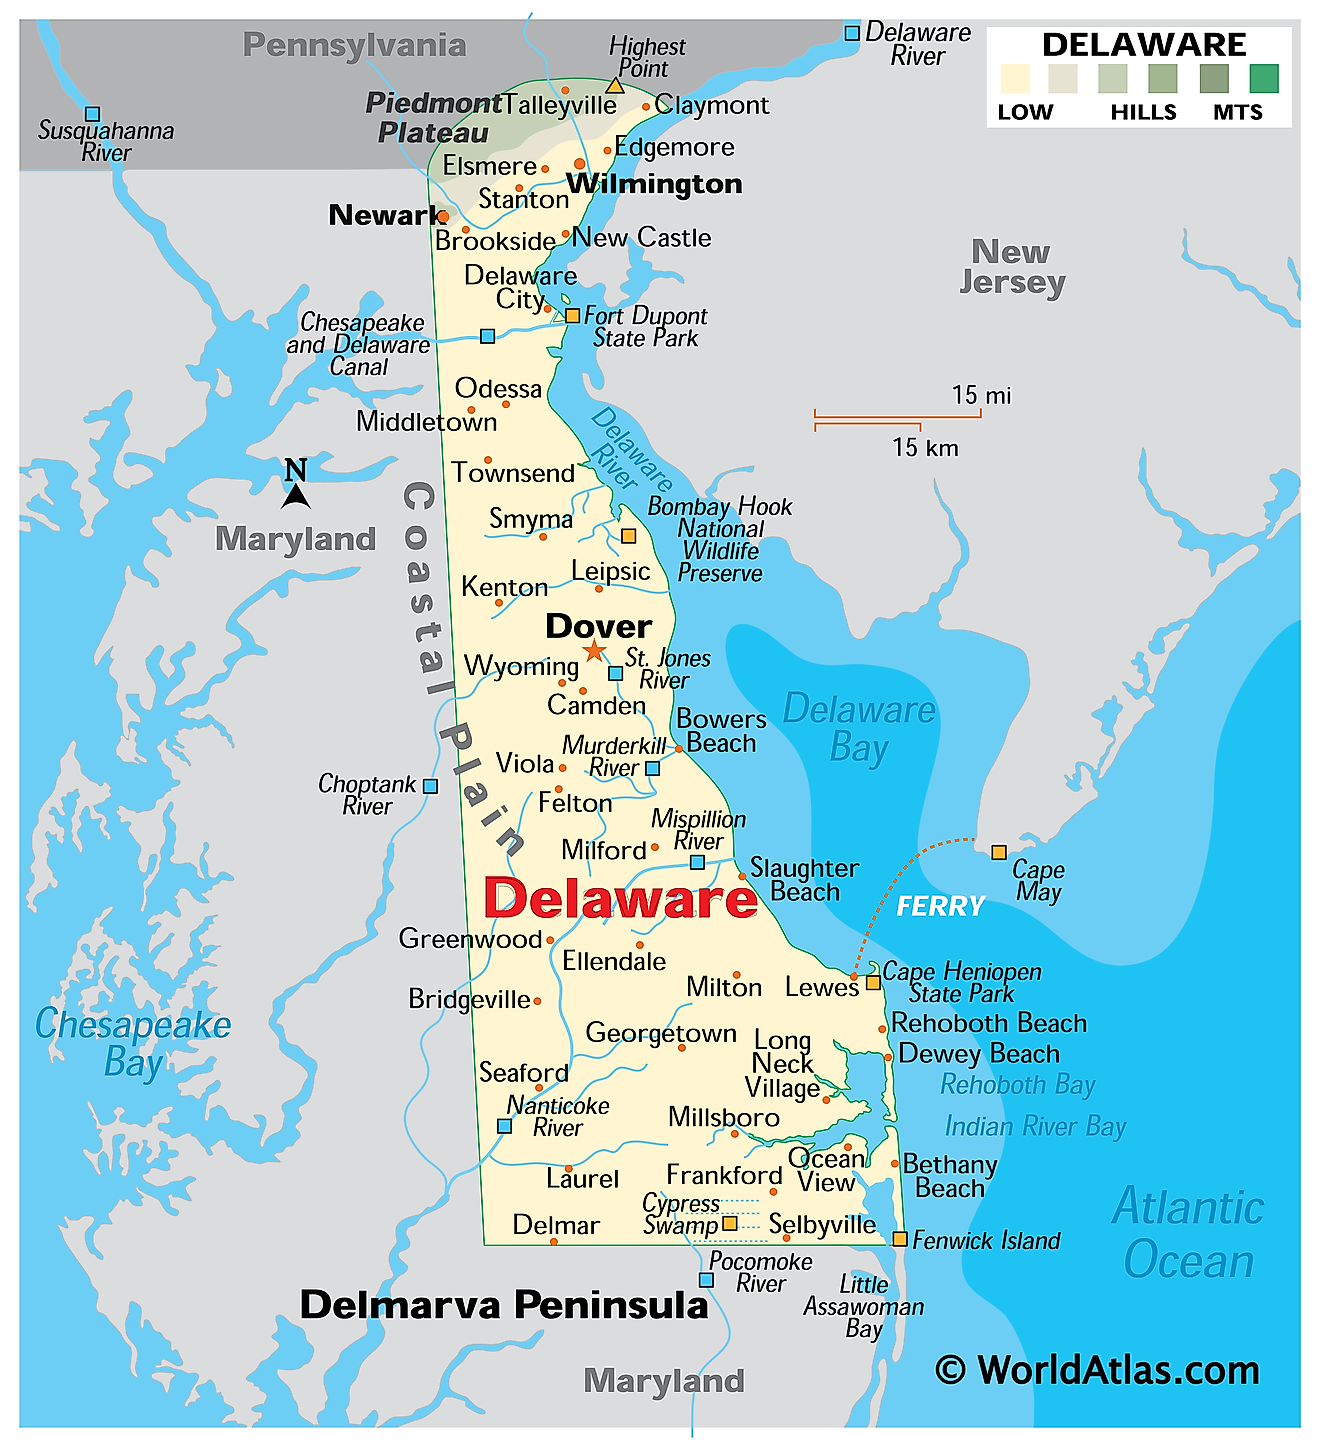 Large Map Of Delaware Delaware Maps & Facts - World Atlas